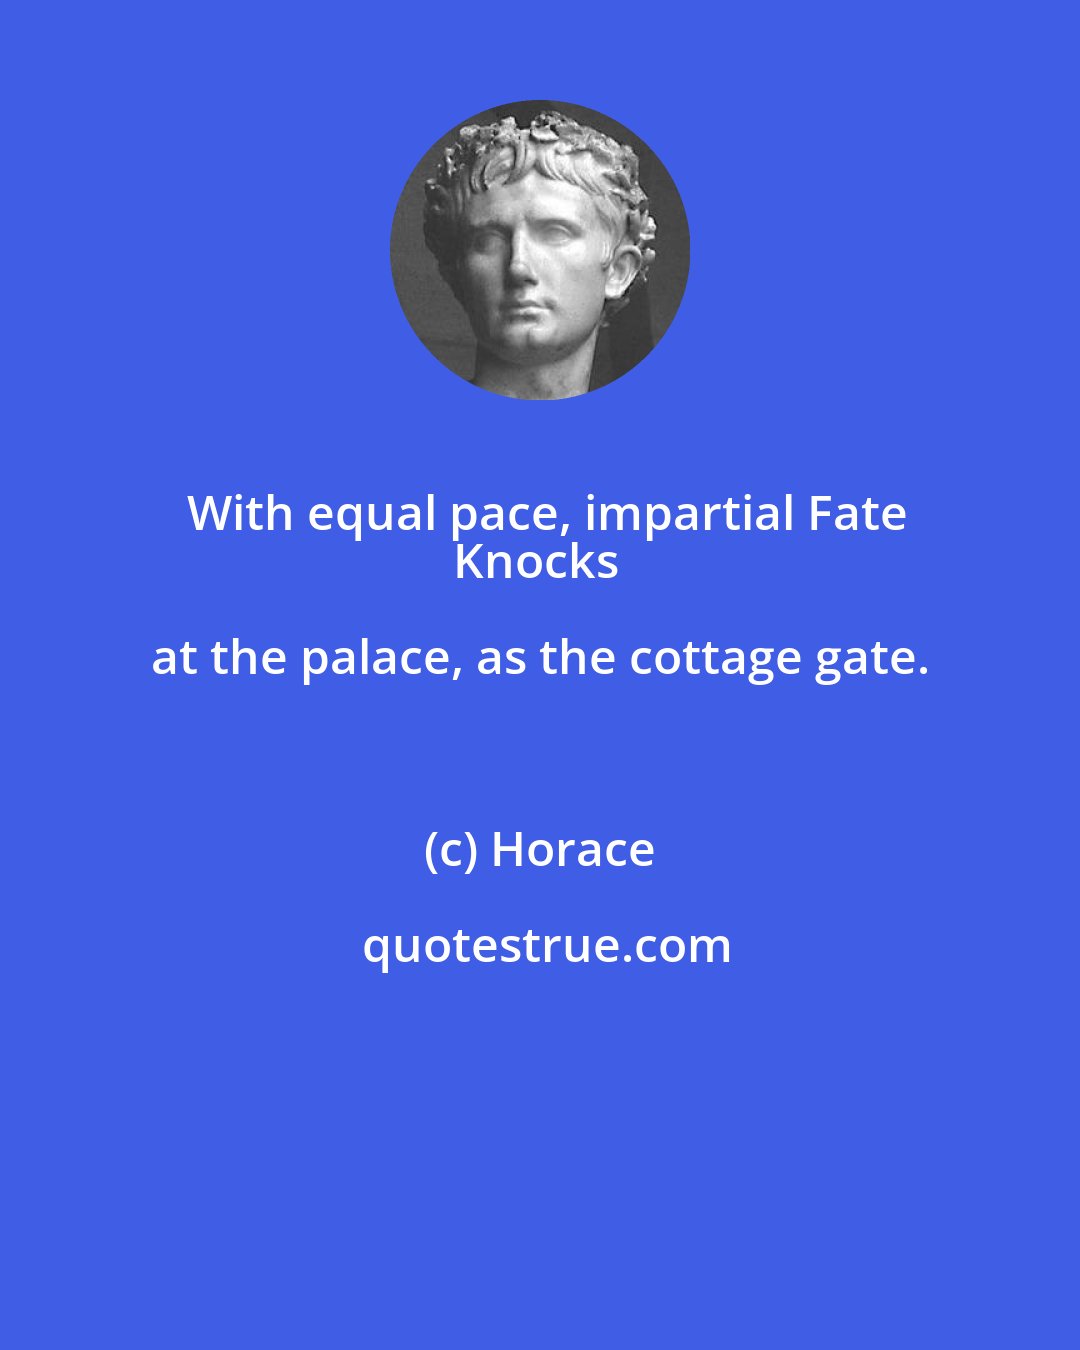 Horace: With equal pace, impartial Fate
Knocks at the palace, as the cottage gate.